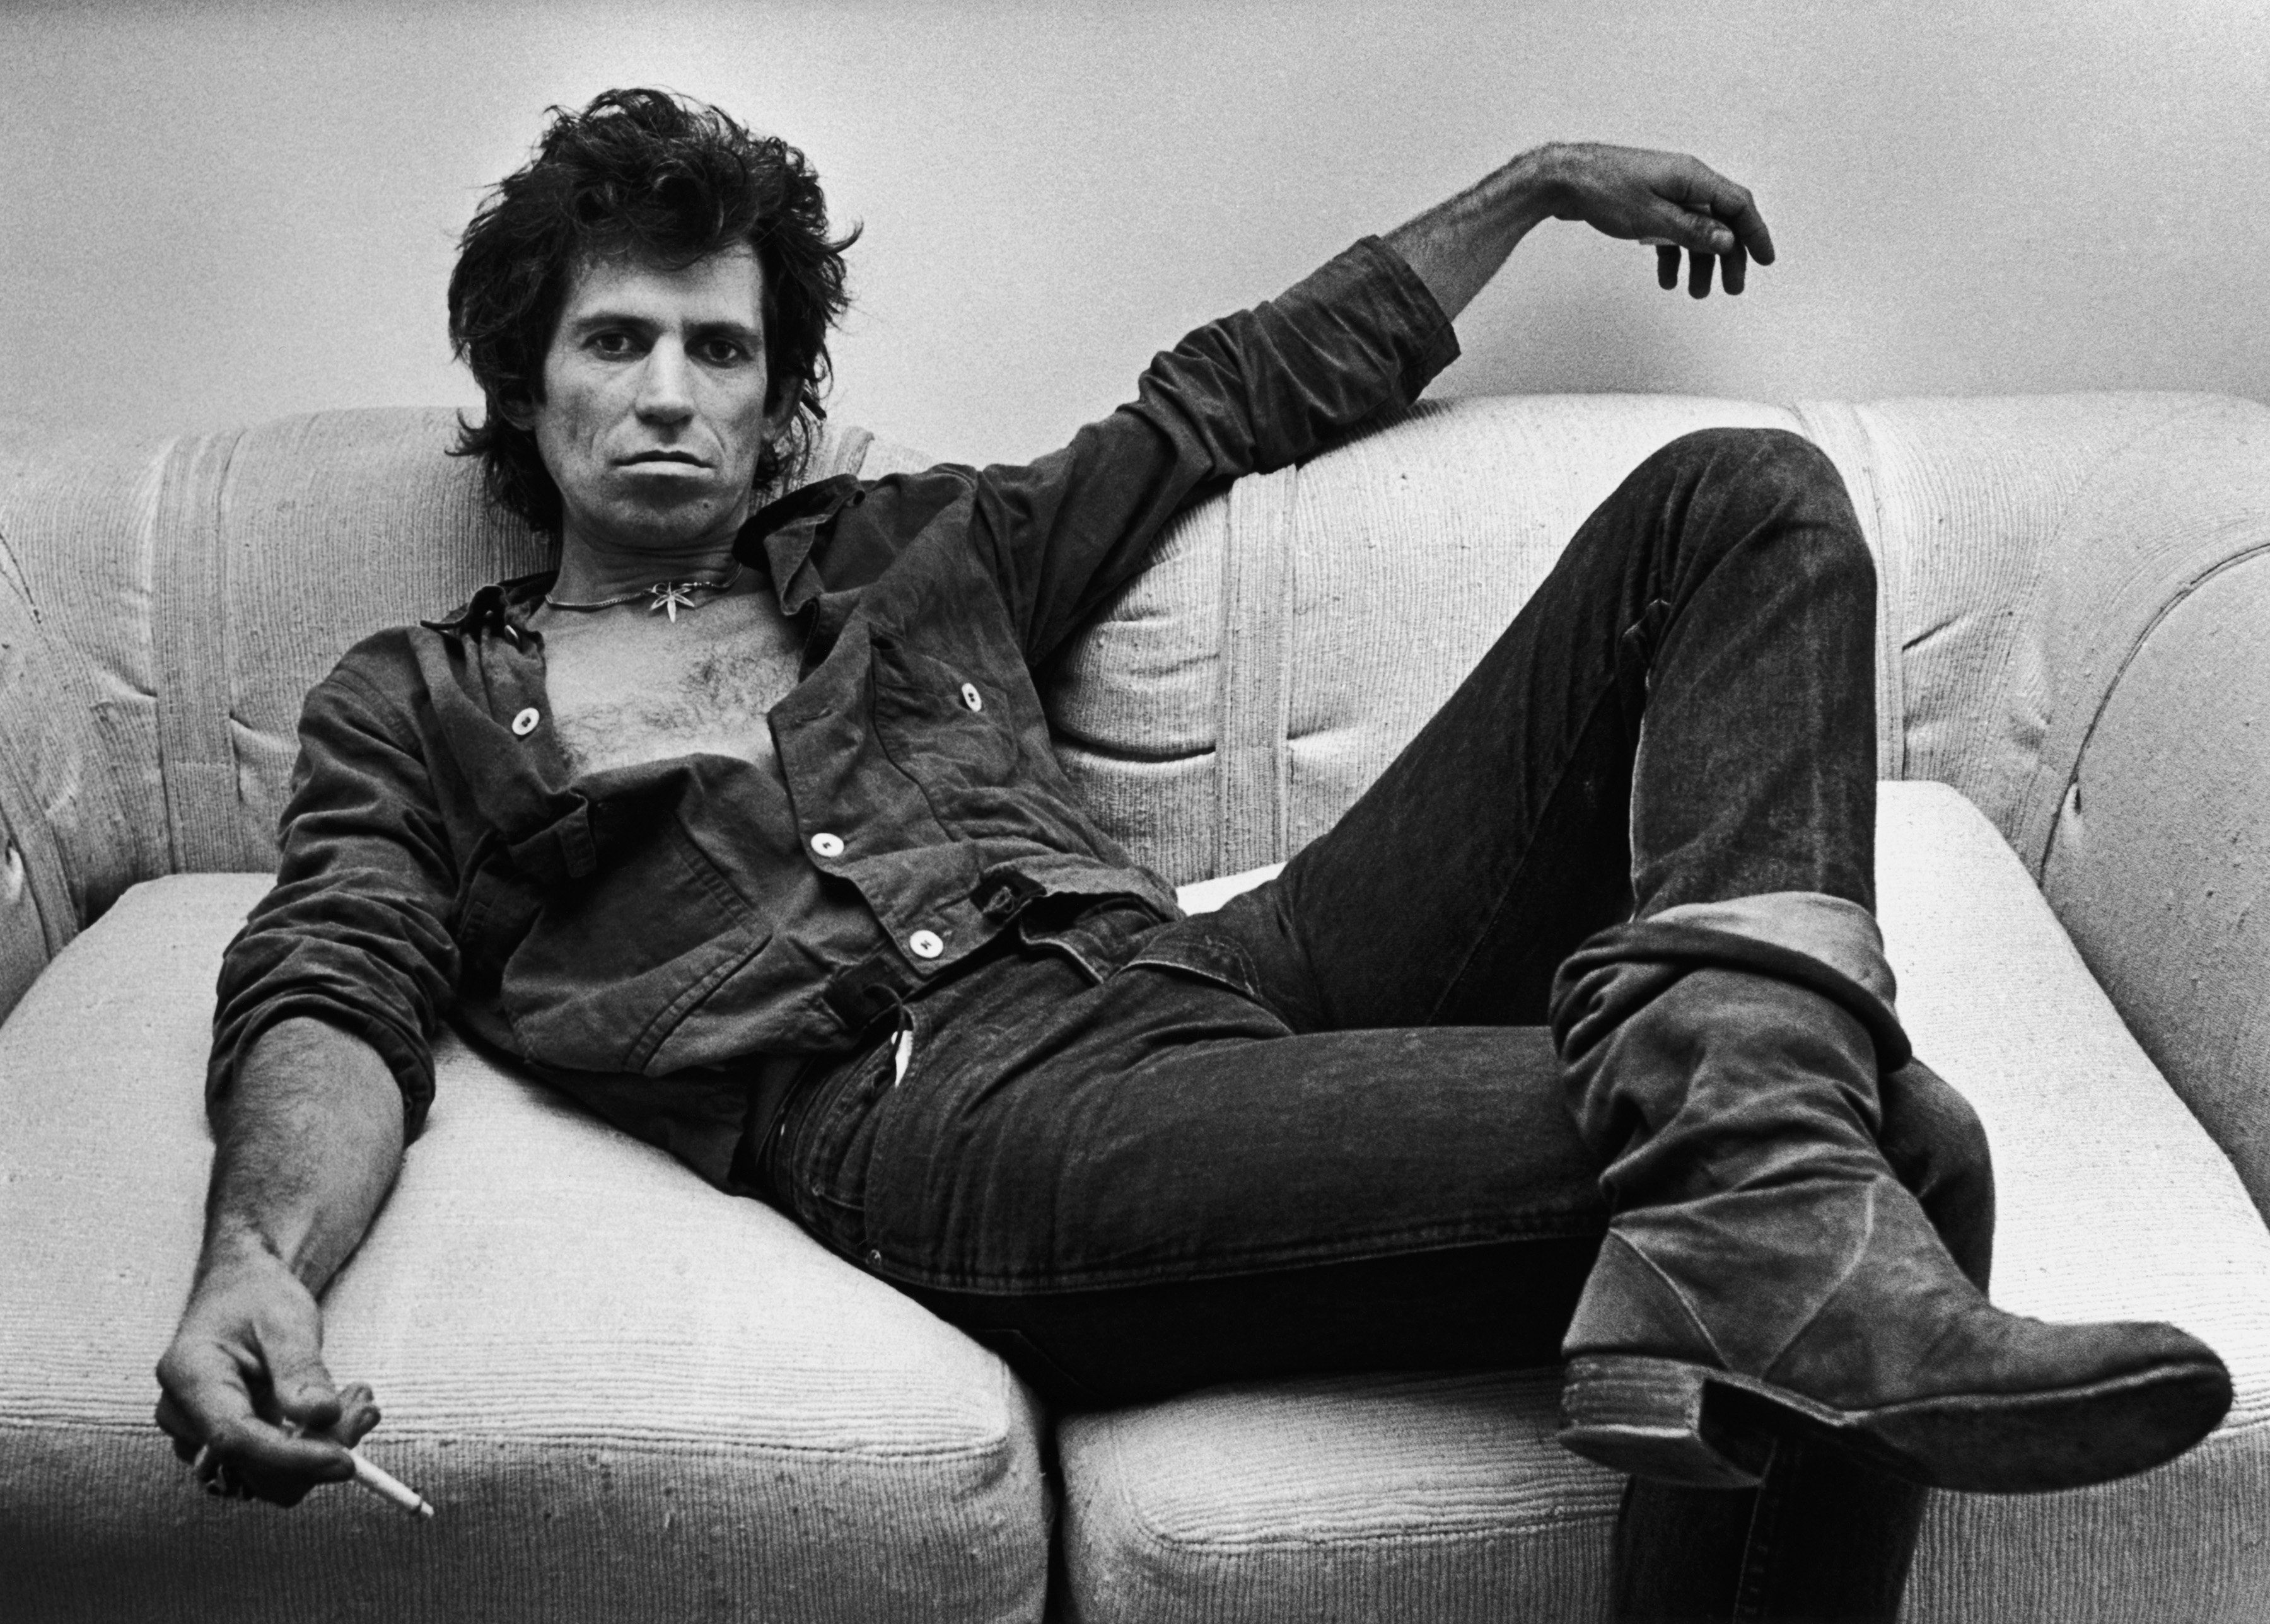 The Rolling Stones guitarist Keith Richards sits on a couch with a cigarette.